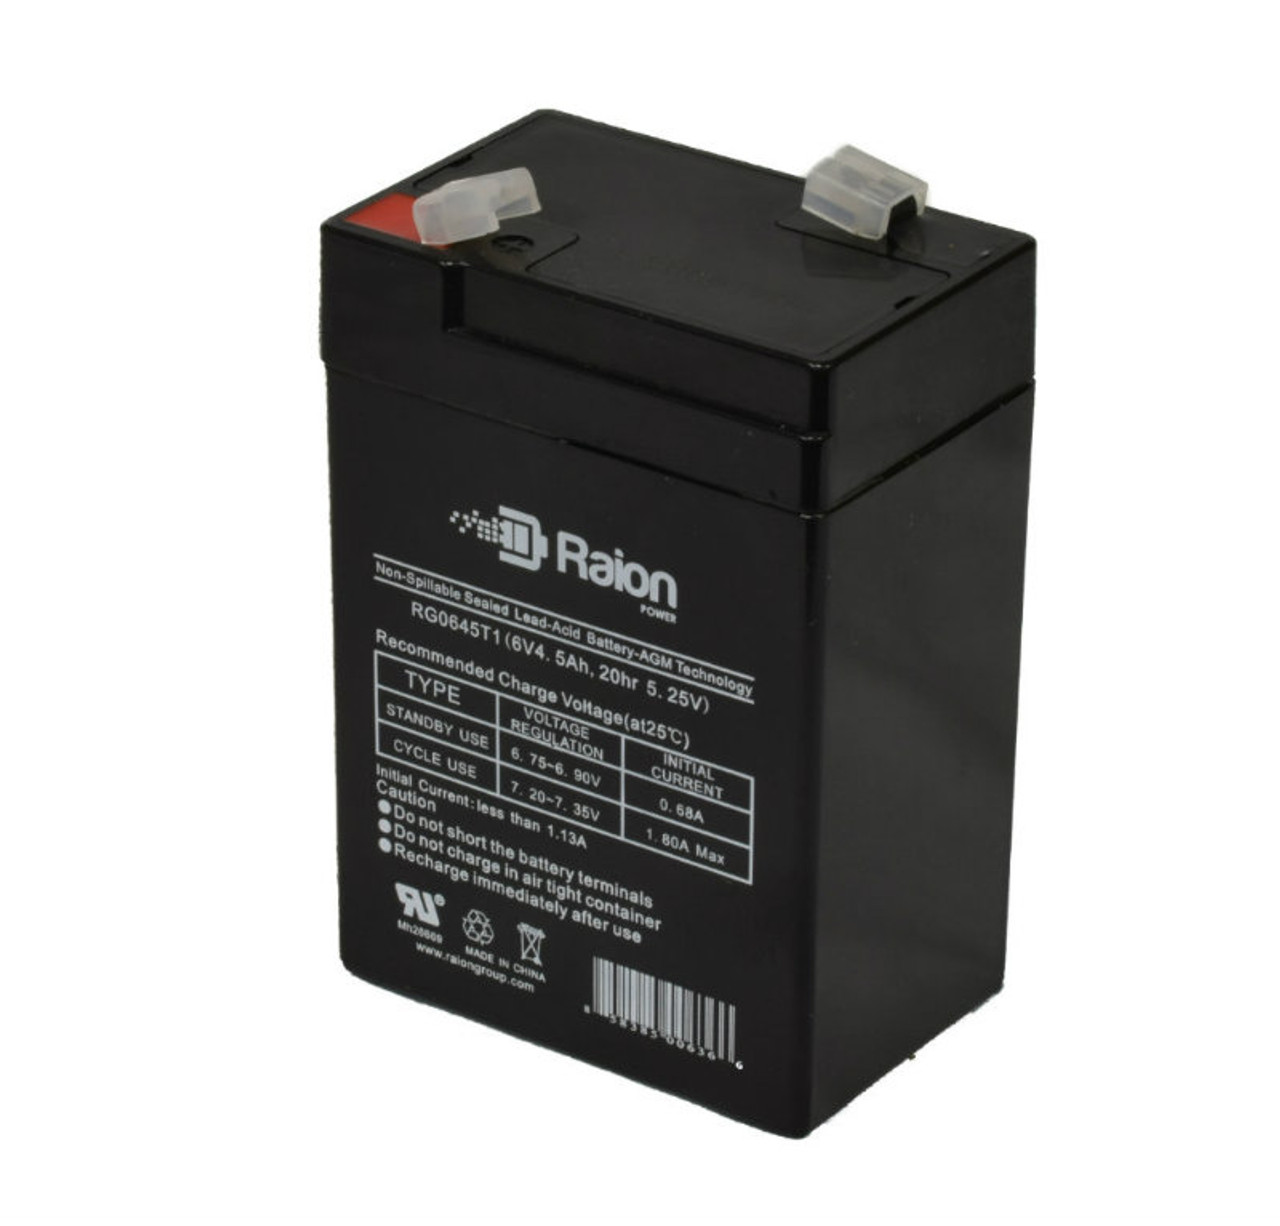 Raion Power RG0645T1 6V 4.5Ah Replacement Battery Cartridge for Sunnyway SW650(II)